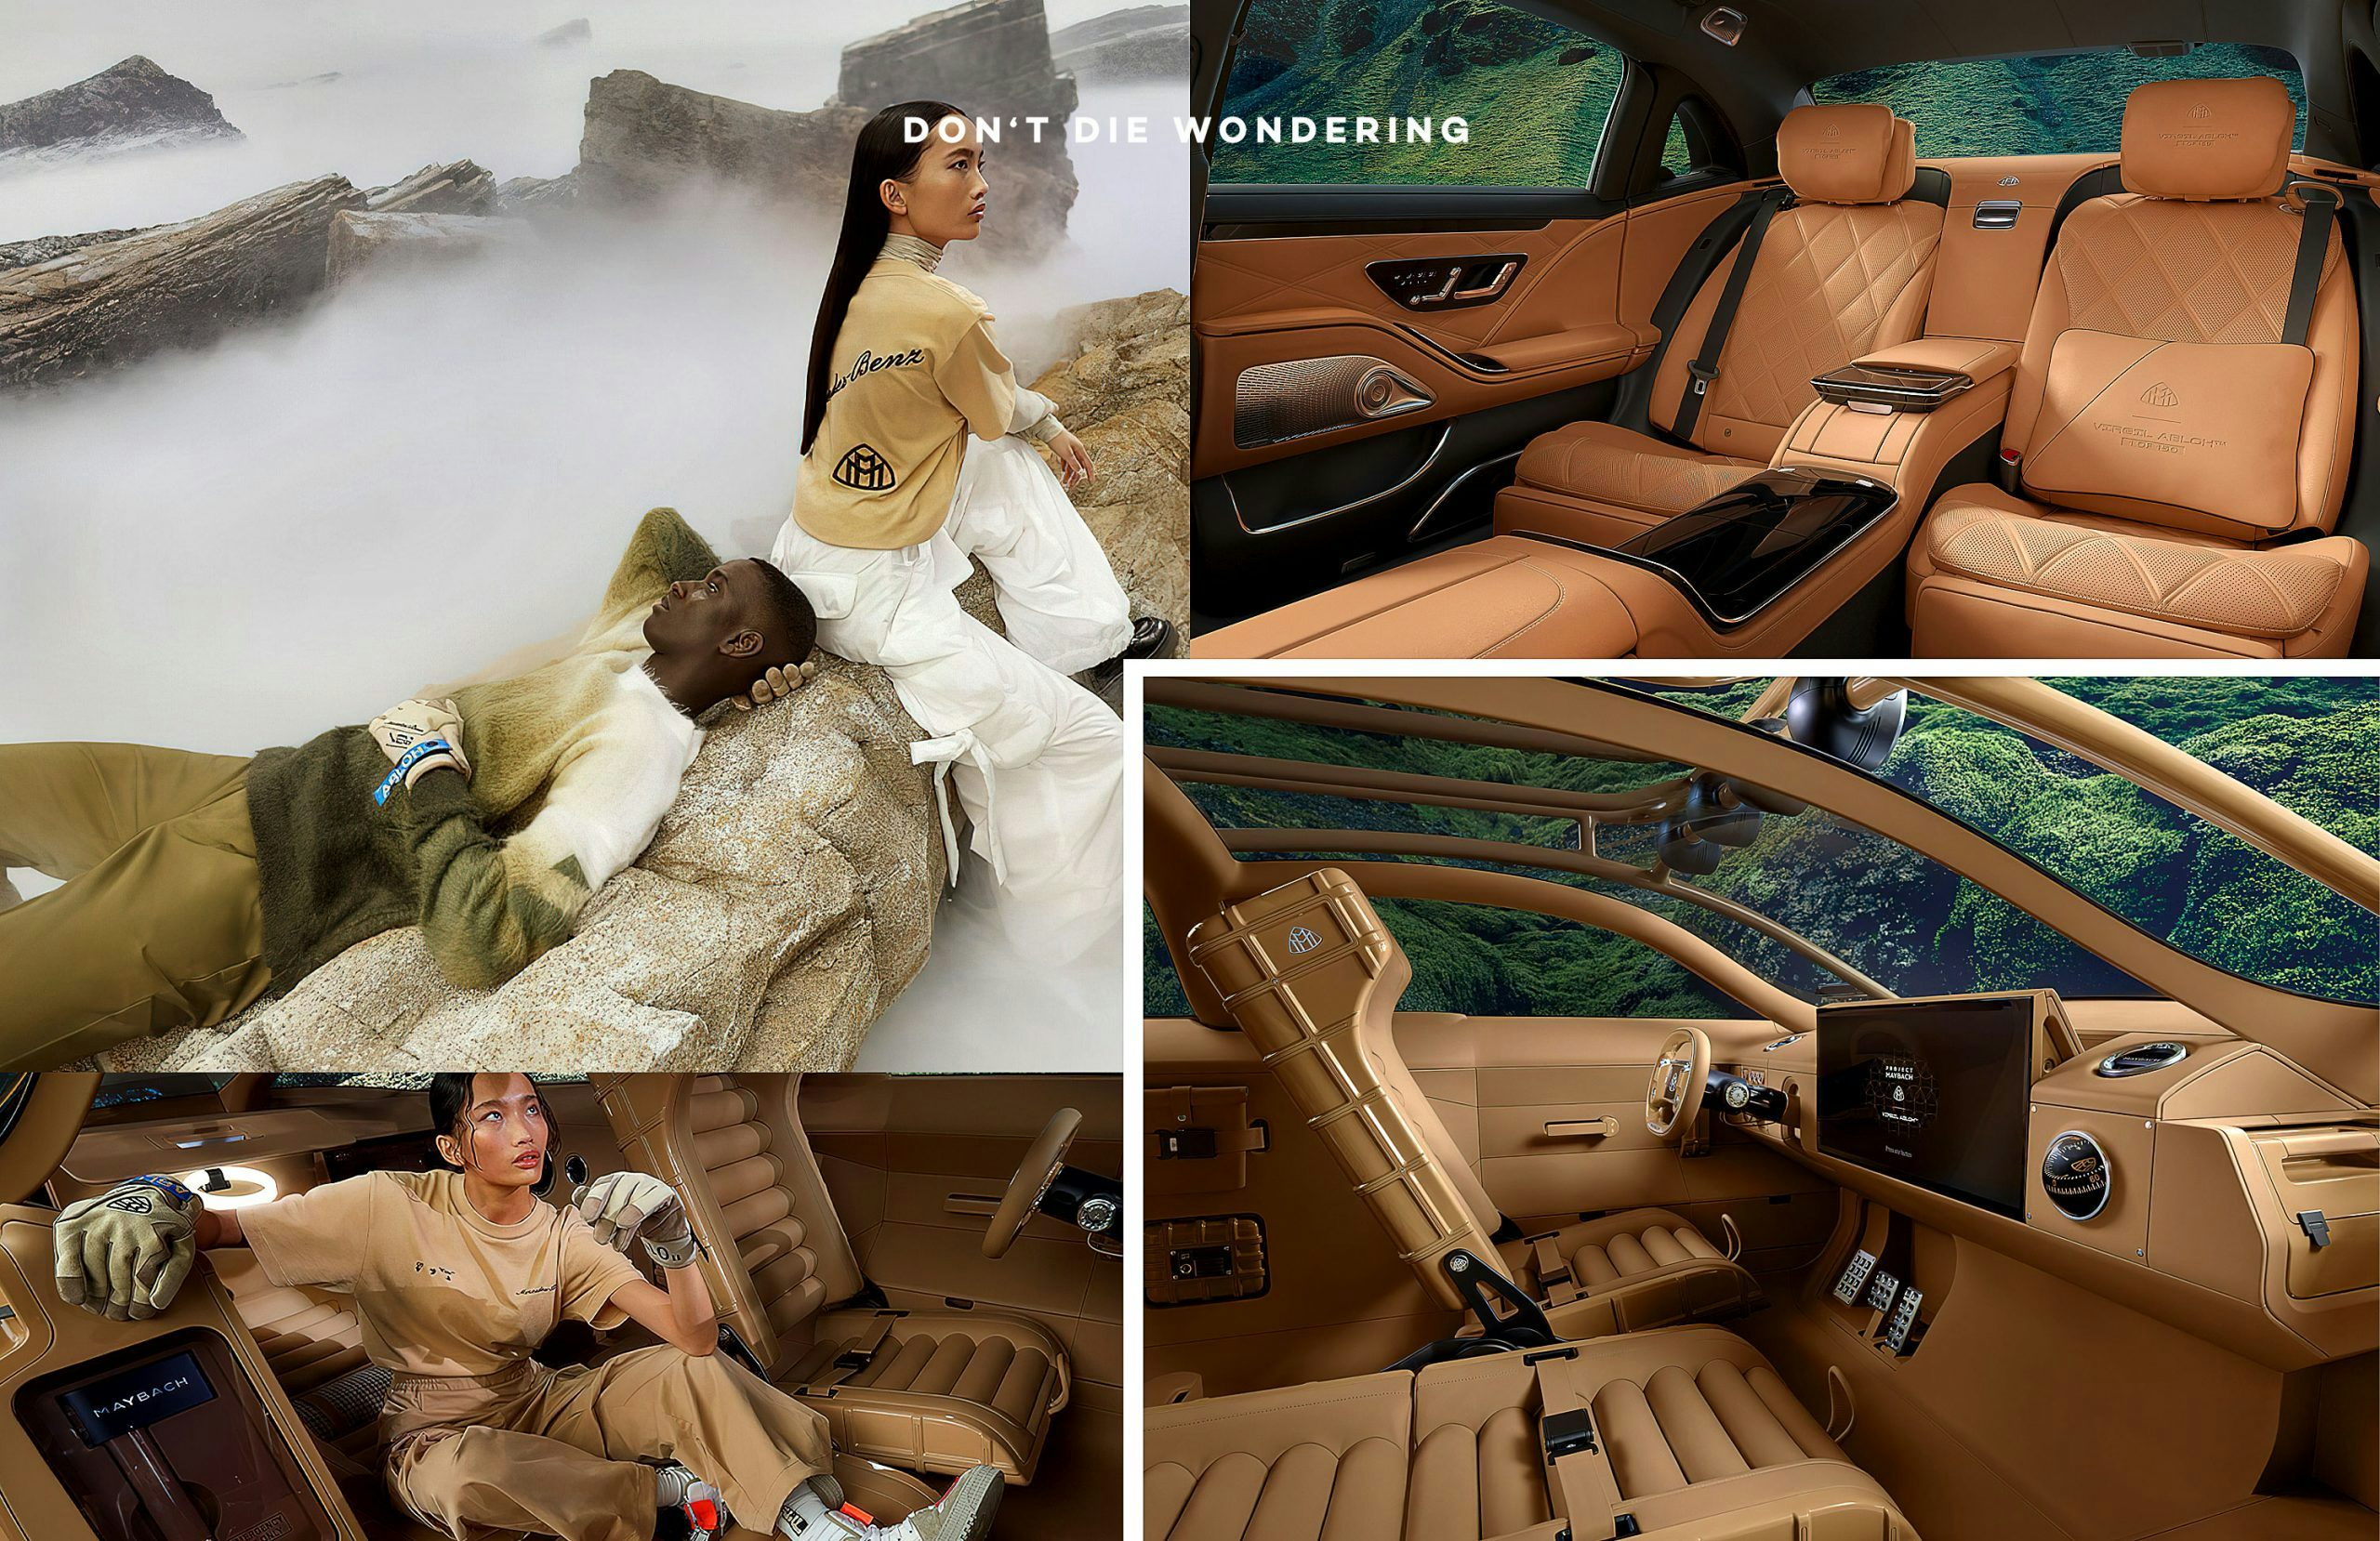 Mercedes-Benz - With Project MAYBACH, Virgil Abloh and Gorden Wagener  created in a collaborative design process a visionary interpretation of  sophisticated luxury: unseen, disruptive and inspiring. We feel very  honored to have